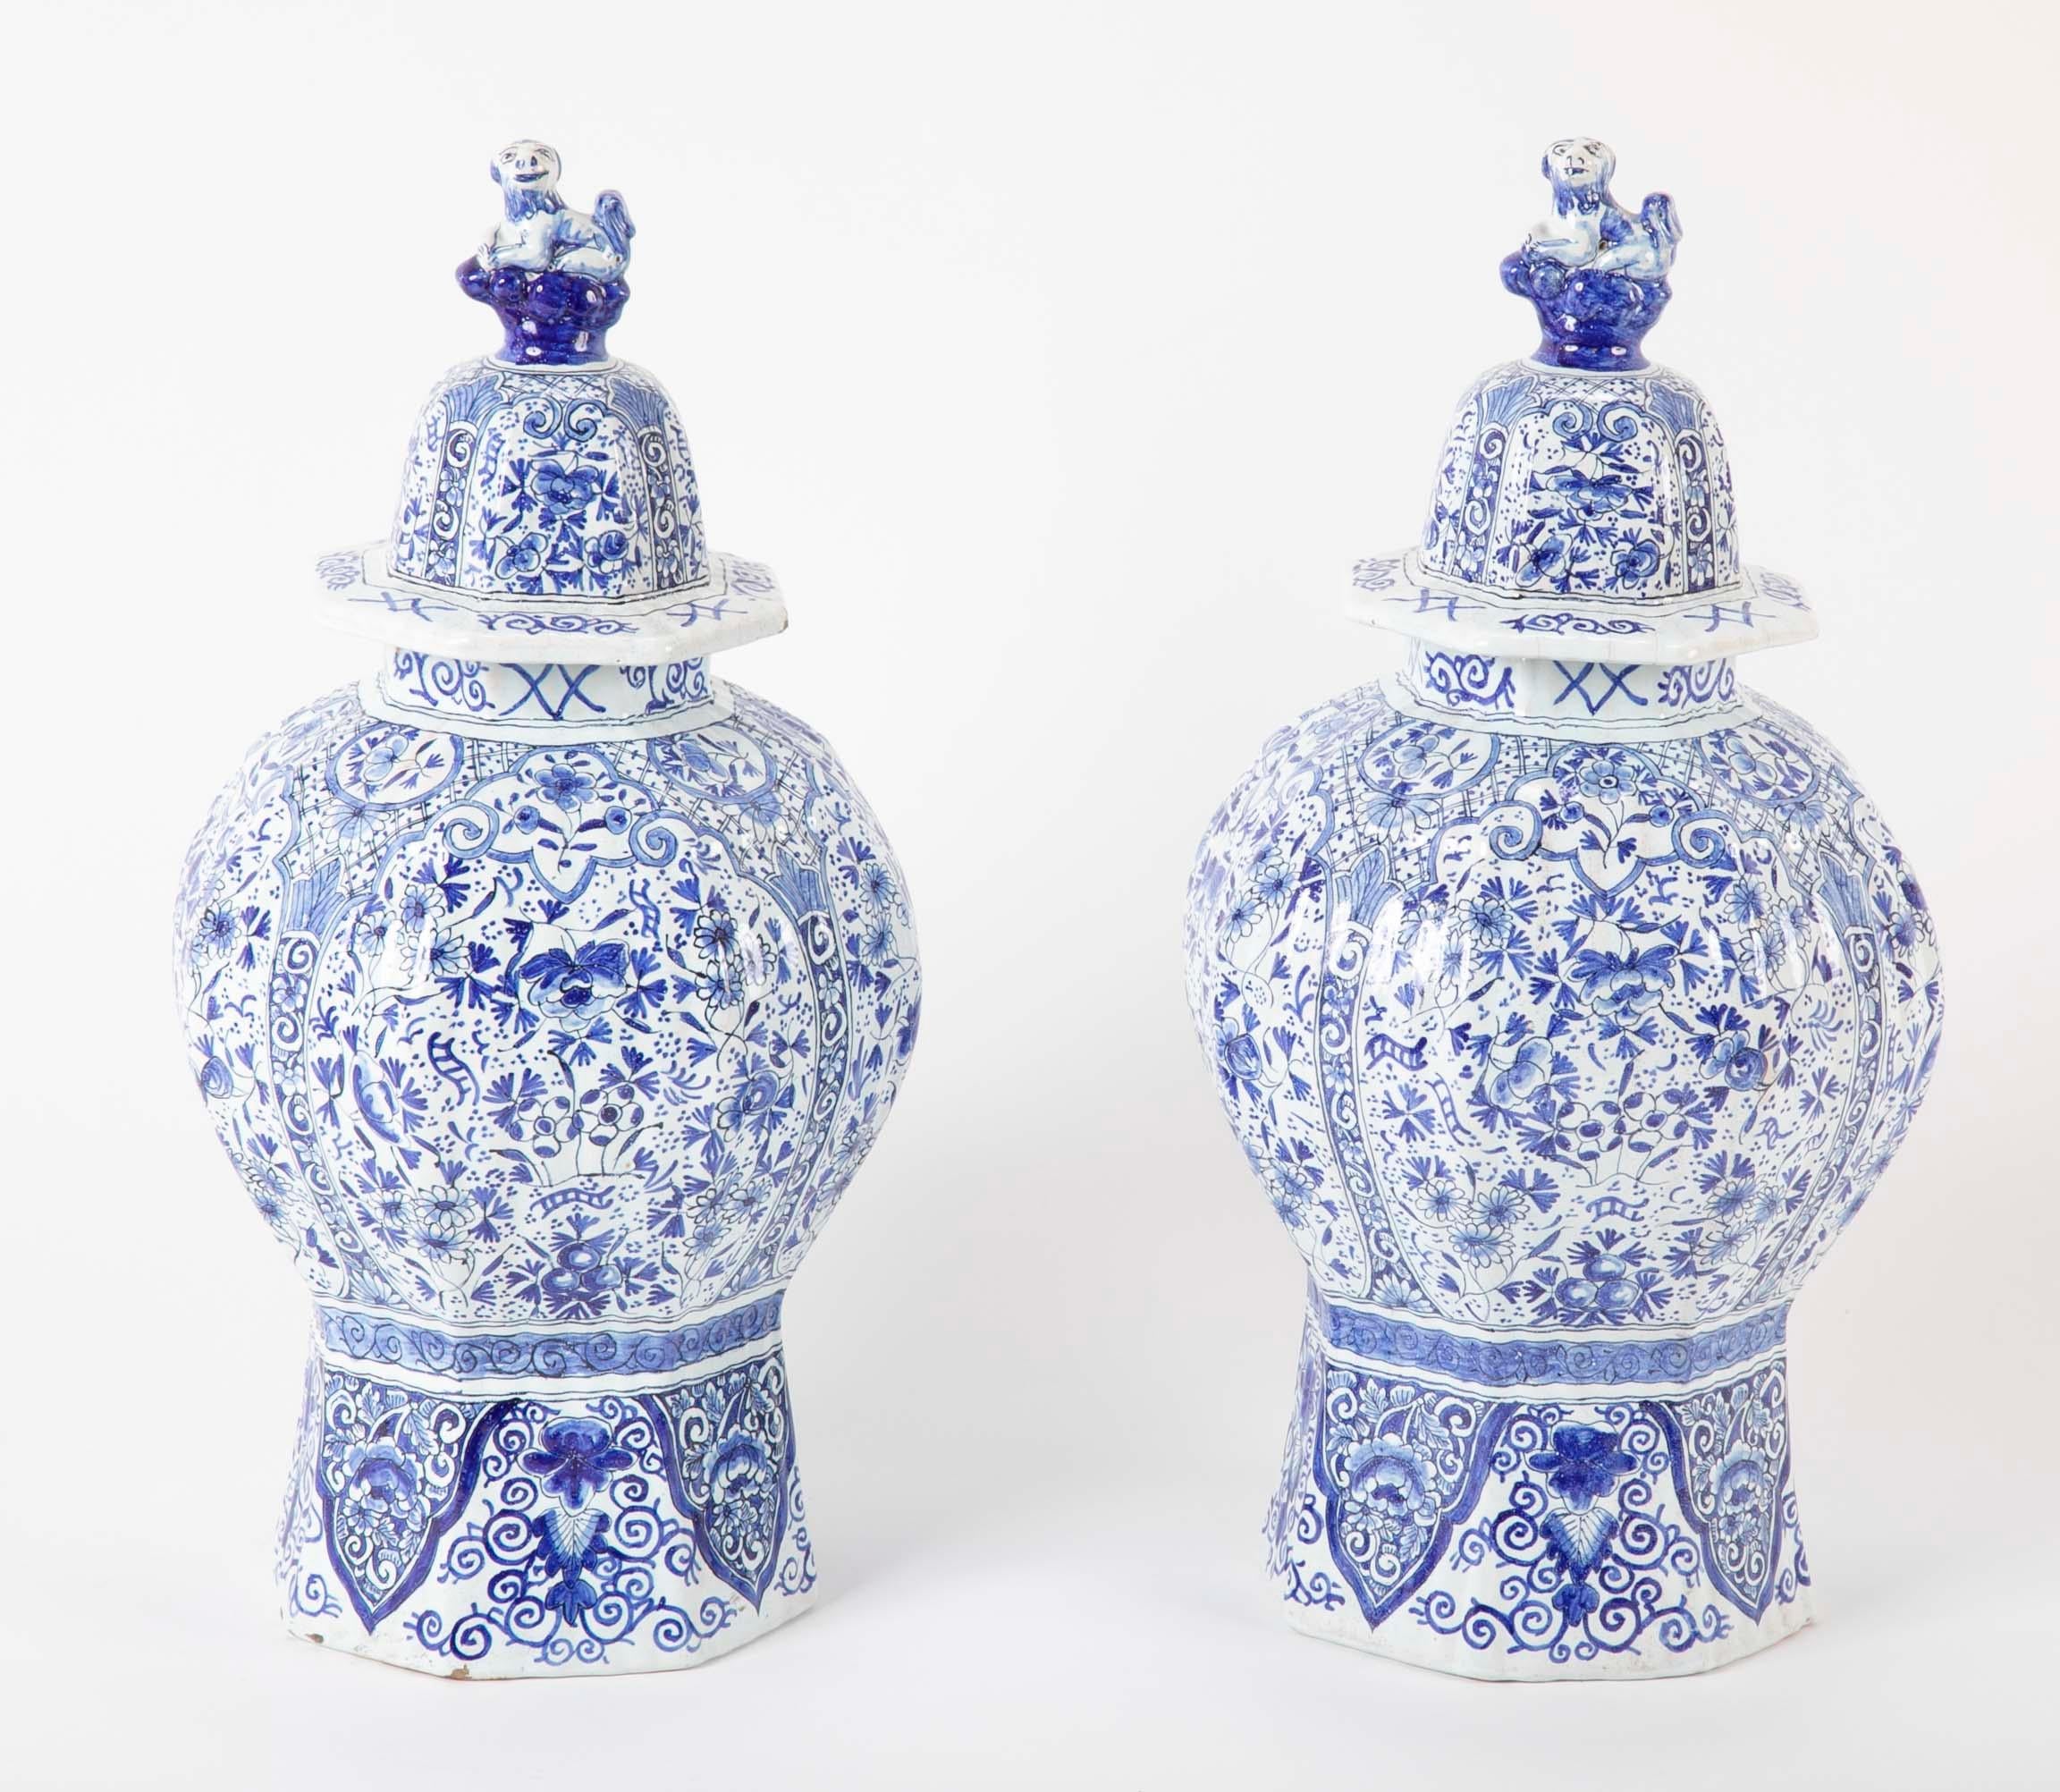 A pair of blue and white late 19th-early 20th century Dutch Ginger jars.